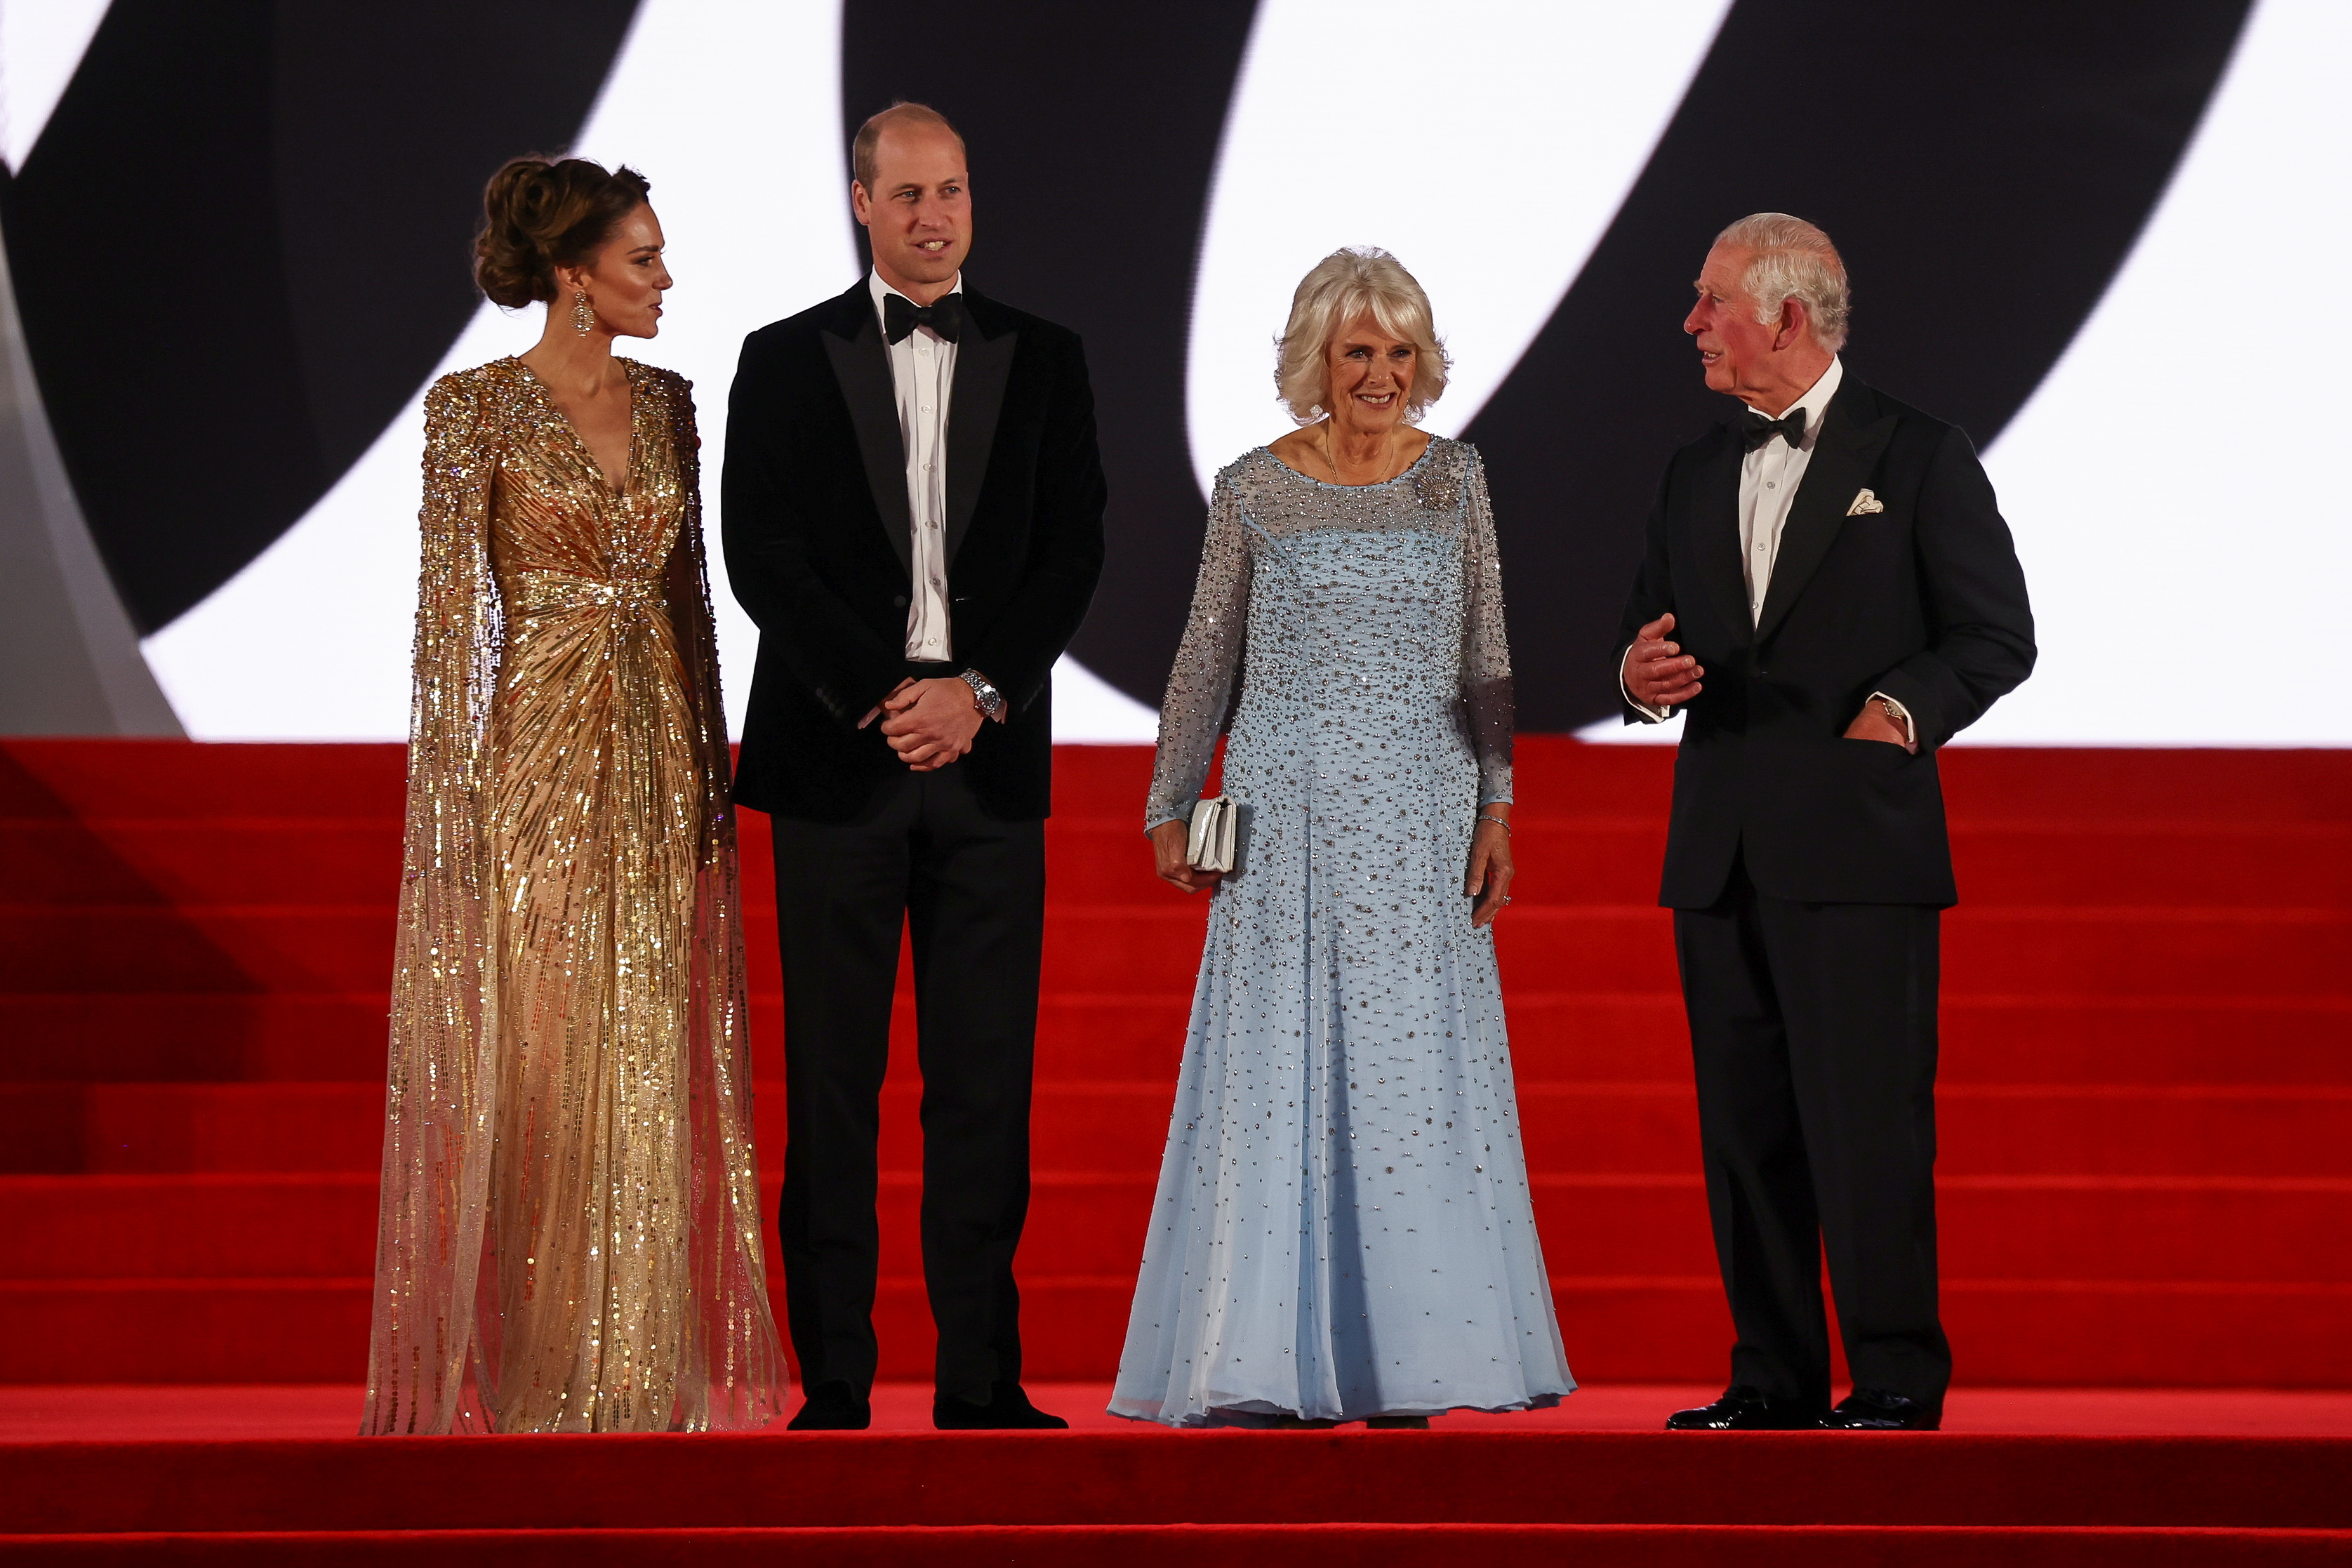 The Duke and Duchess of Cambridge with Carlos and Camilla at the premiere of "no time to die" in London (Reuters)